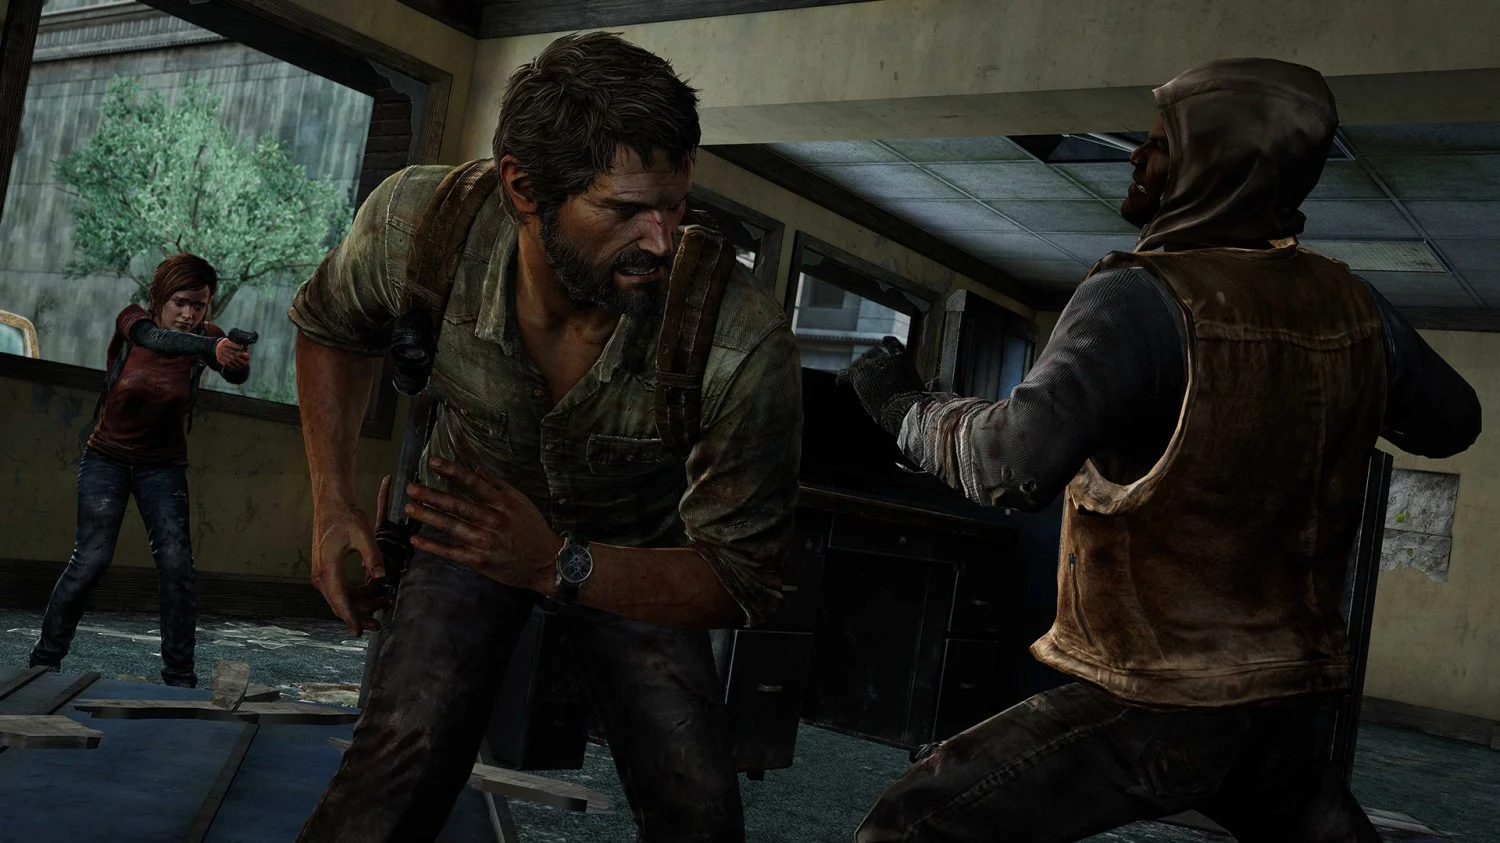 Jogo The Last of Us Remastered Hits - PS4 - Loja Cyber Z